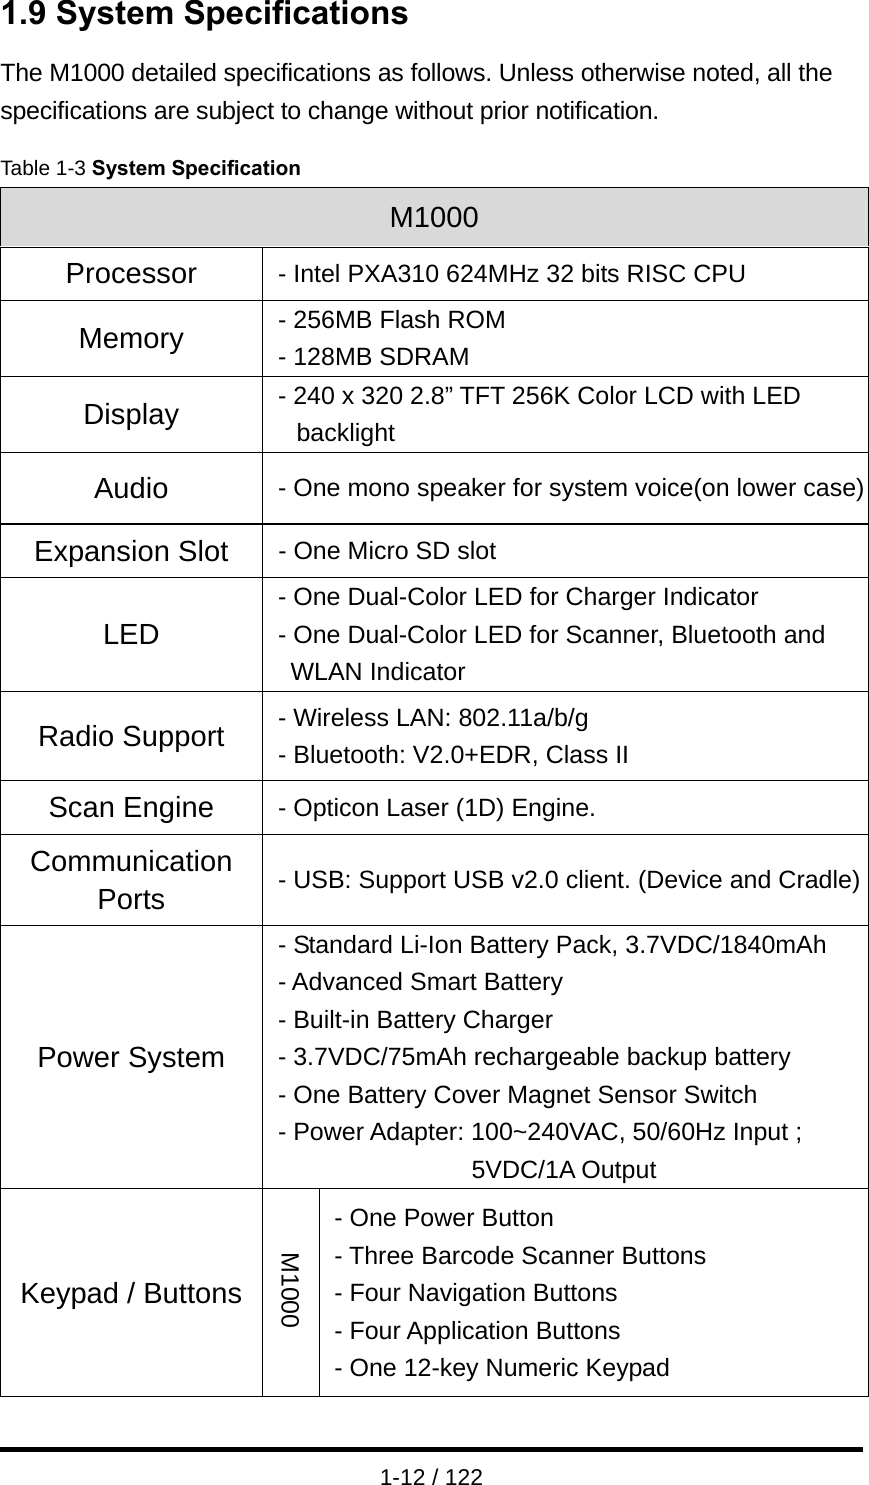  1-12 / 122 1.9 System Specifications The M1000 detailed specifications as follows. Unless otherwise noted, all the specifications are subject to change without prior notification.  Table 1-3 System Specification M1000 Processor  - Intel PXA310 624MHz 32 bits RISC CPU Memory  - 256MB Flash ROM - 128MB SDRAM Display  - 240 x 320 2.8” TFT 256K Color LCD with LED backlight Audio  - One mono speaker for system voice(on lower case)Expansion Slot  - One Micro SD slot LED - One Dual-Color LED for Charger Indicator - One Dual-Color LED for Scanner, Bluetooth and WLAN Indicator Radio Support  - Wireless LAN: 802.11a/b/g - Bluetooth: V2.0+EDR, Class II Scan Engine  - Opticon Laser (1D) Engine. Communication Ports  - USB: Support USB v2.0 client. (Device and Cradle)Power System - Standard Li-Ion Battery Pack, 3.7VDC/1840mAh - Advanced Smart Battery - Built-in Battery Charger - 3.7VDC/75mAh rechargeable backup battery - One Battery Cover Magnet Sensor Switch - Power Adapter: 100~240VAC, 50/60Hz Input ; 5VDC/1A Output Keypad / Buttons M1000 - One Power Button - Three Barcode Scanner Buttons - Four Navigation Buttons - Four Application Buttons - One 12-key Numeric Keypad 